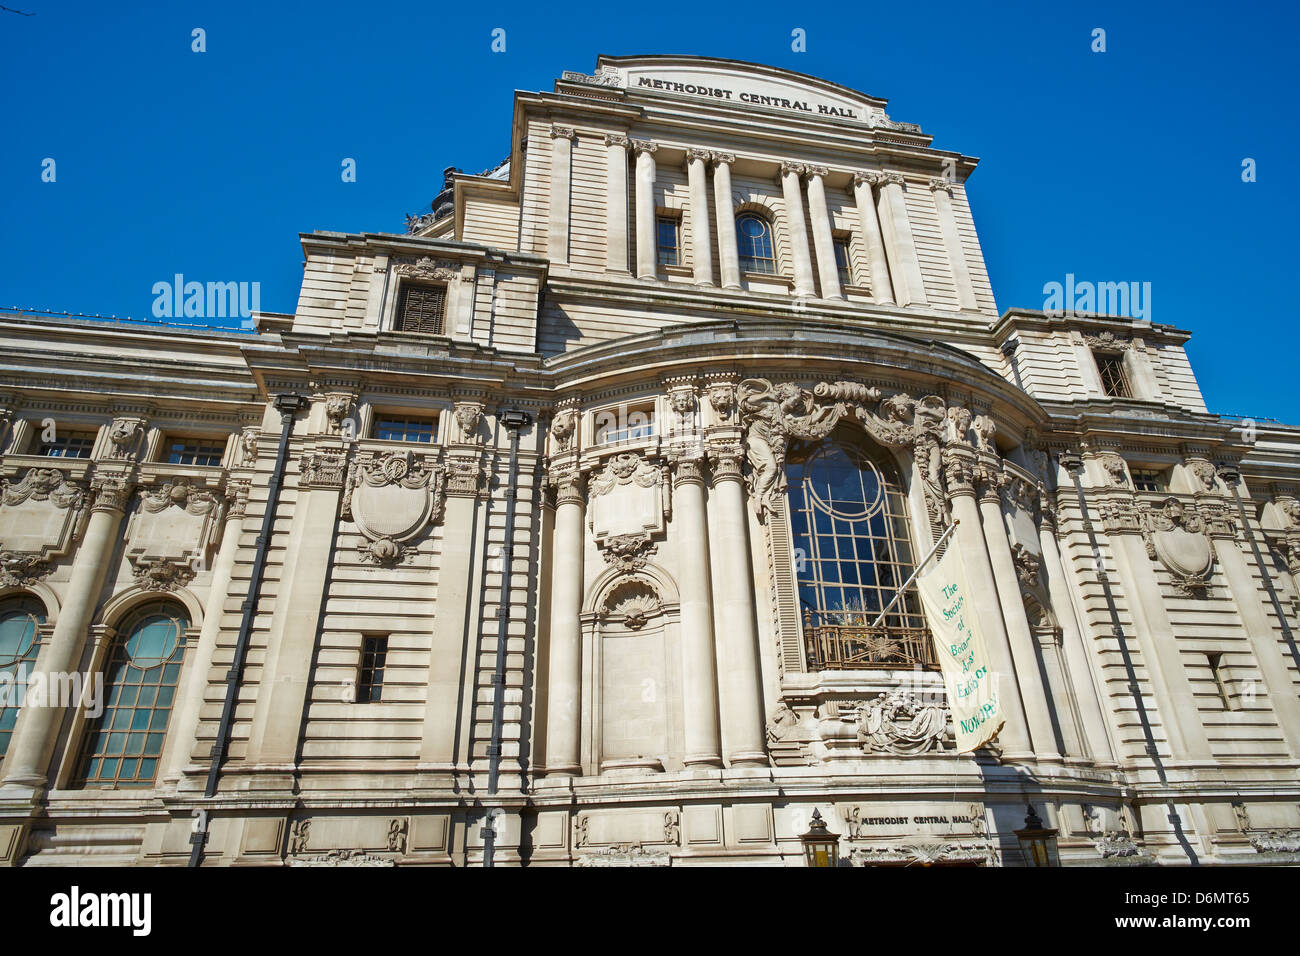 Exterior of the Methodist Central Hall Storey's Gate Westminster London UK Stock Photo